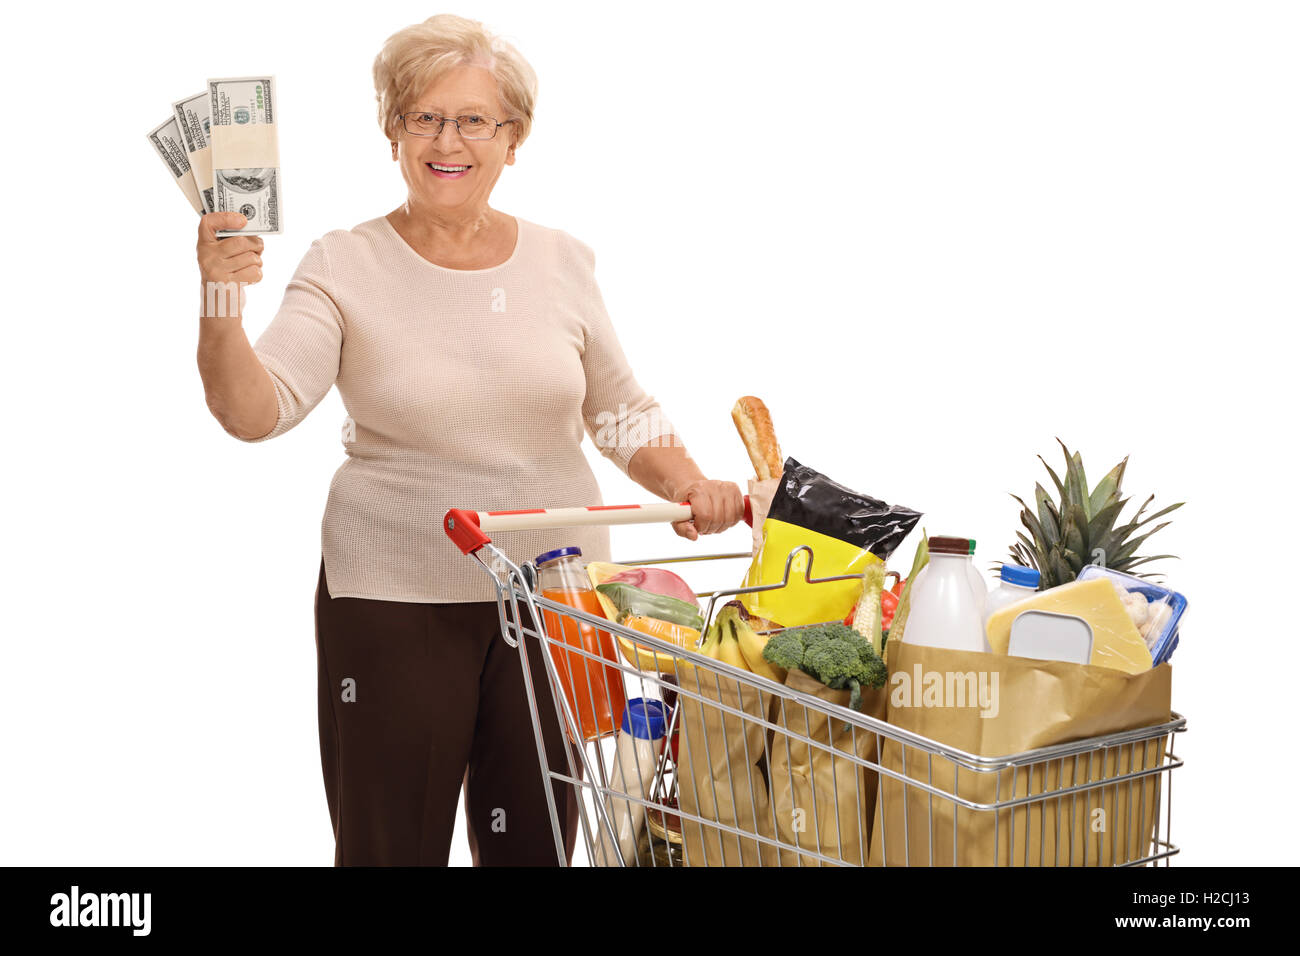 Happy elderly woman posing with a shopping cart full of groceries and stacks of money isolated on white background Stock Photo